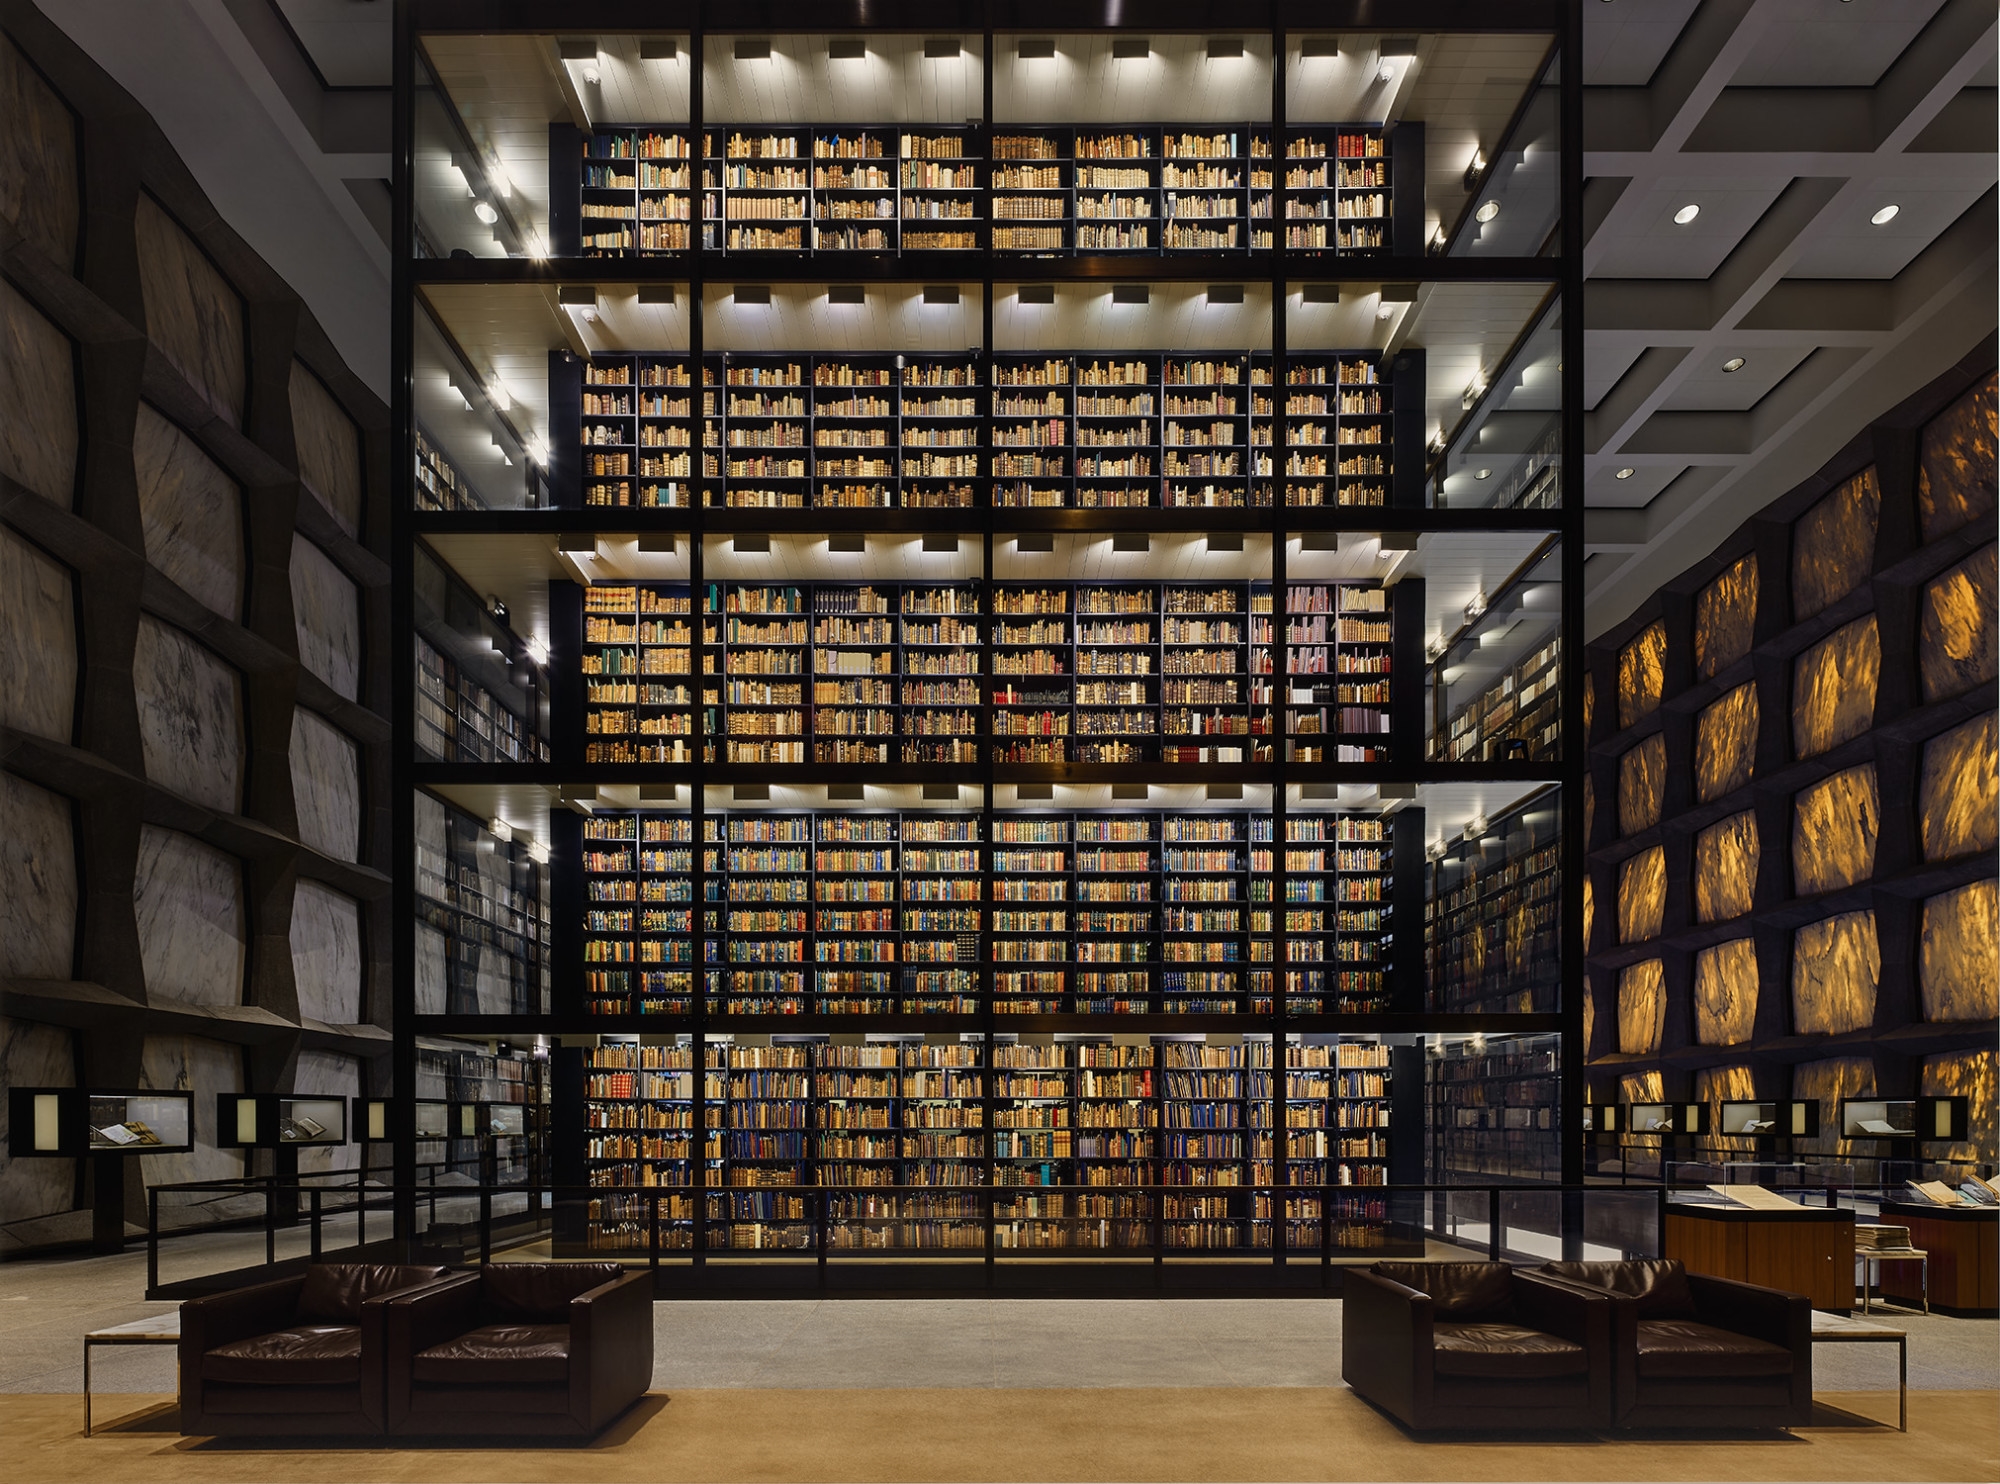 Beinecke Rare Book and Manuscript Library. Yale University, New Haven, USA - Ahmet Ertug